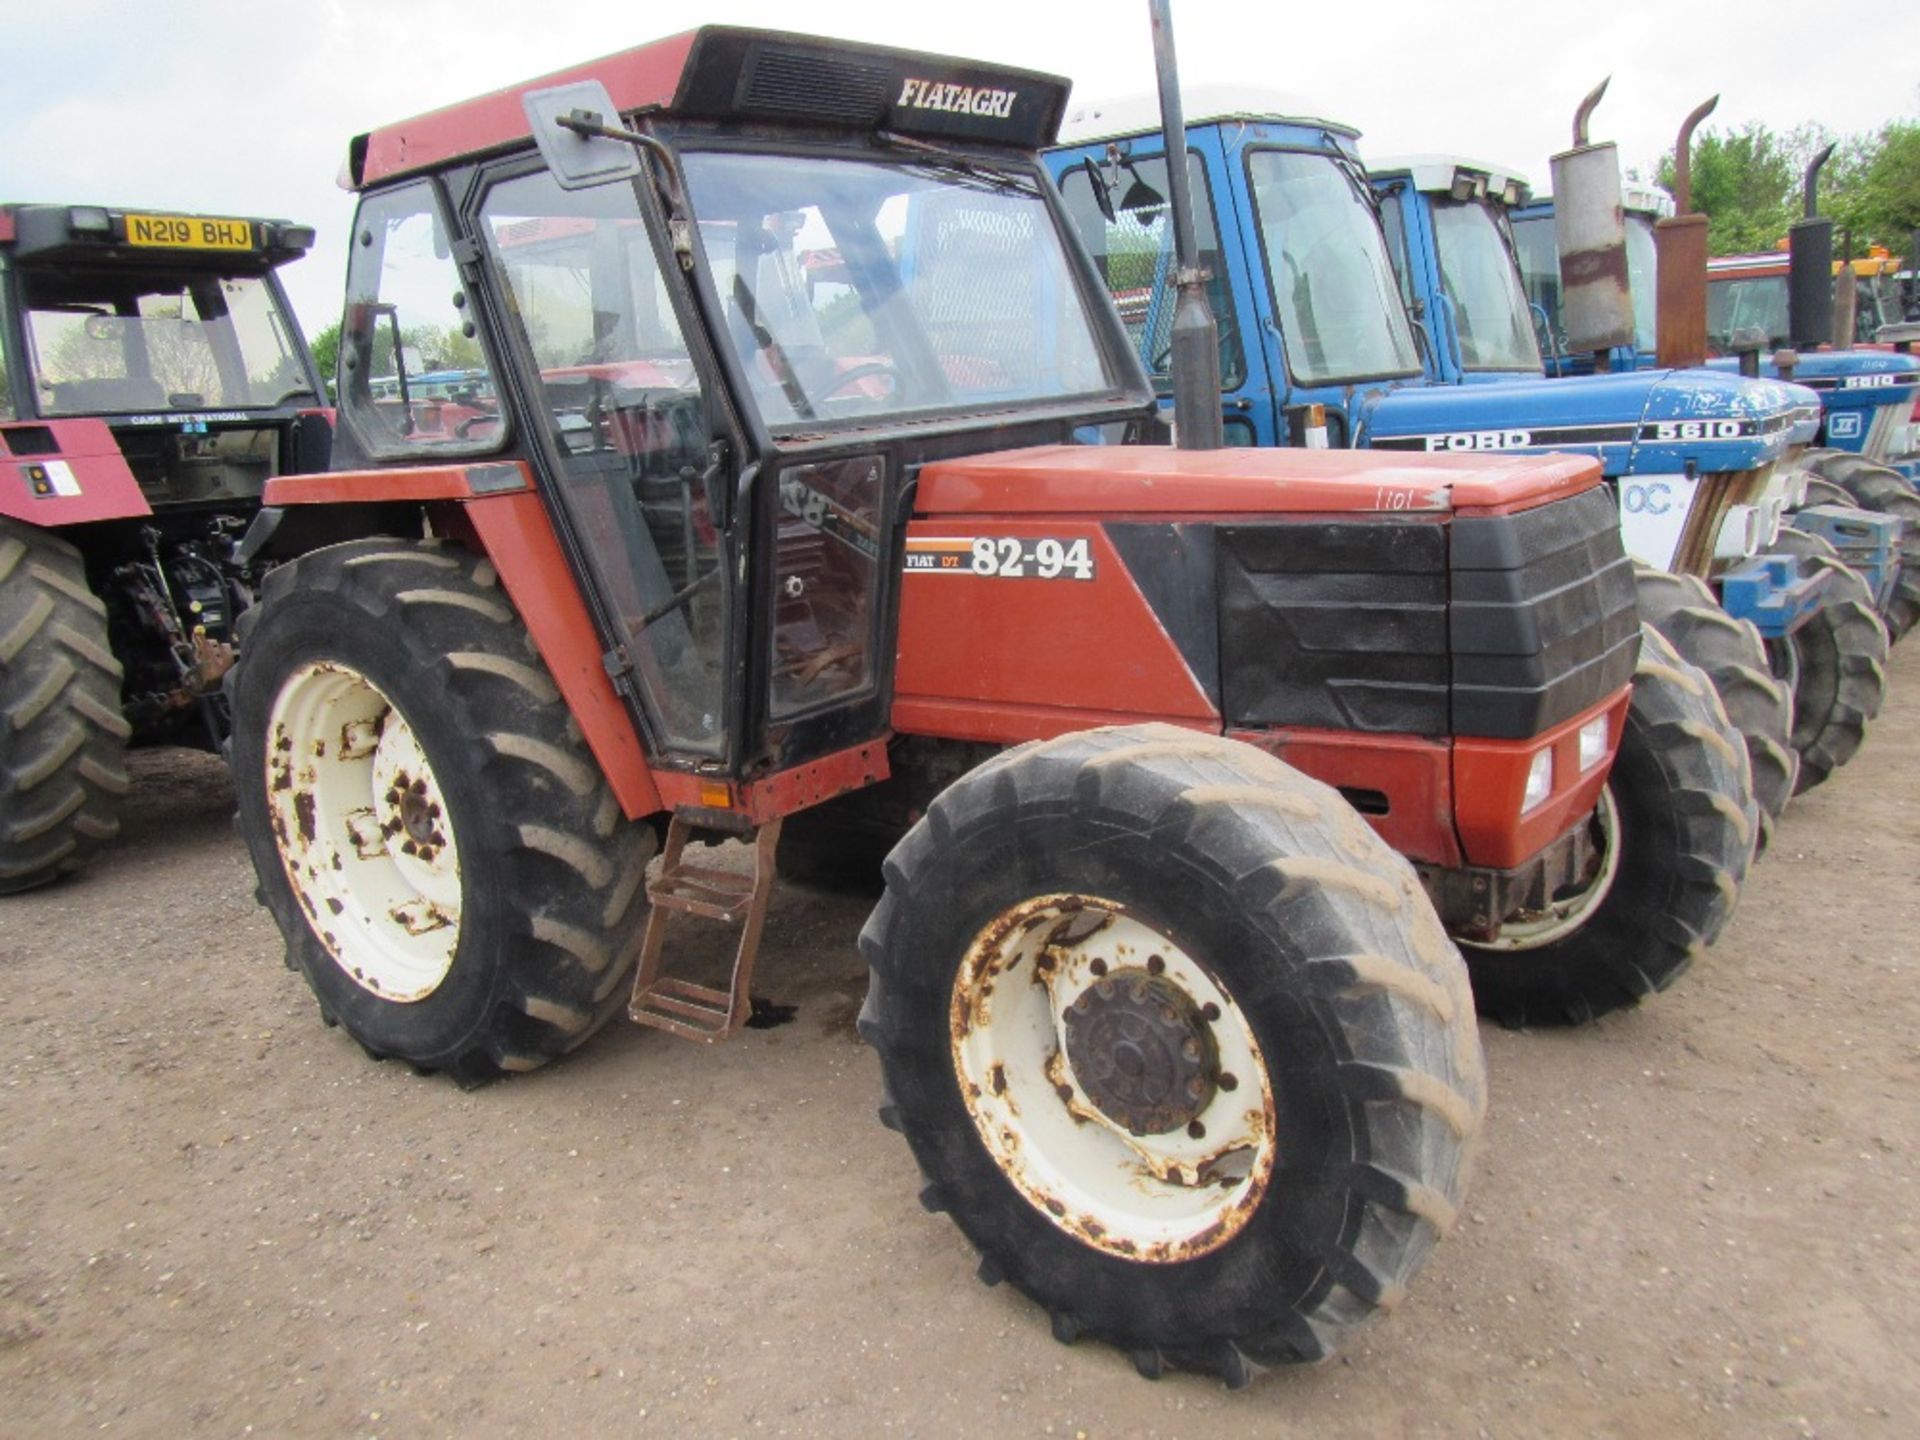 Fiat 82-94 4wd Tractor No V5 - Image 3 of 14